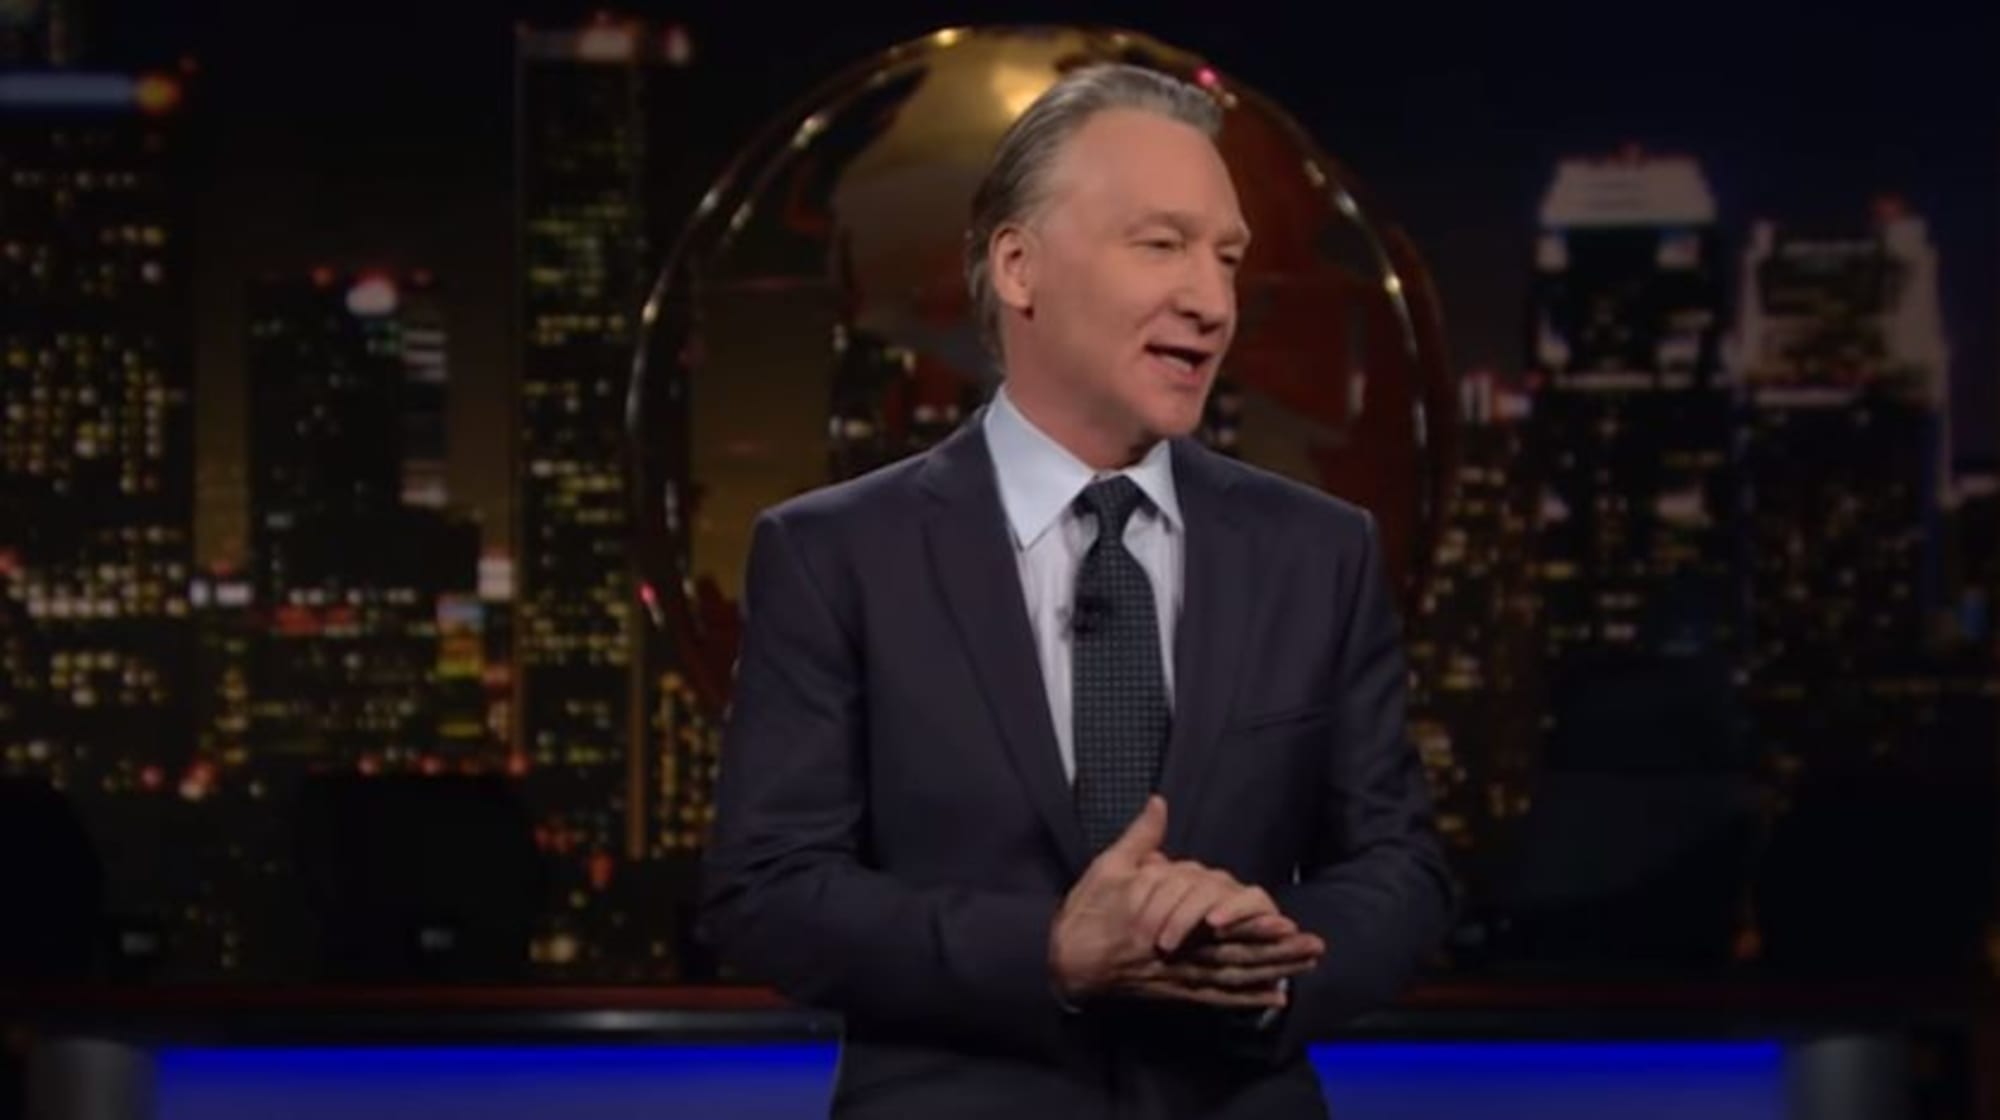 Is Real Time with Bill Maher on tonight, February 23?